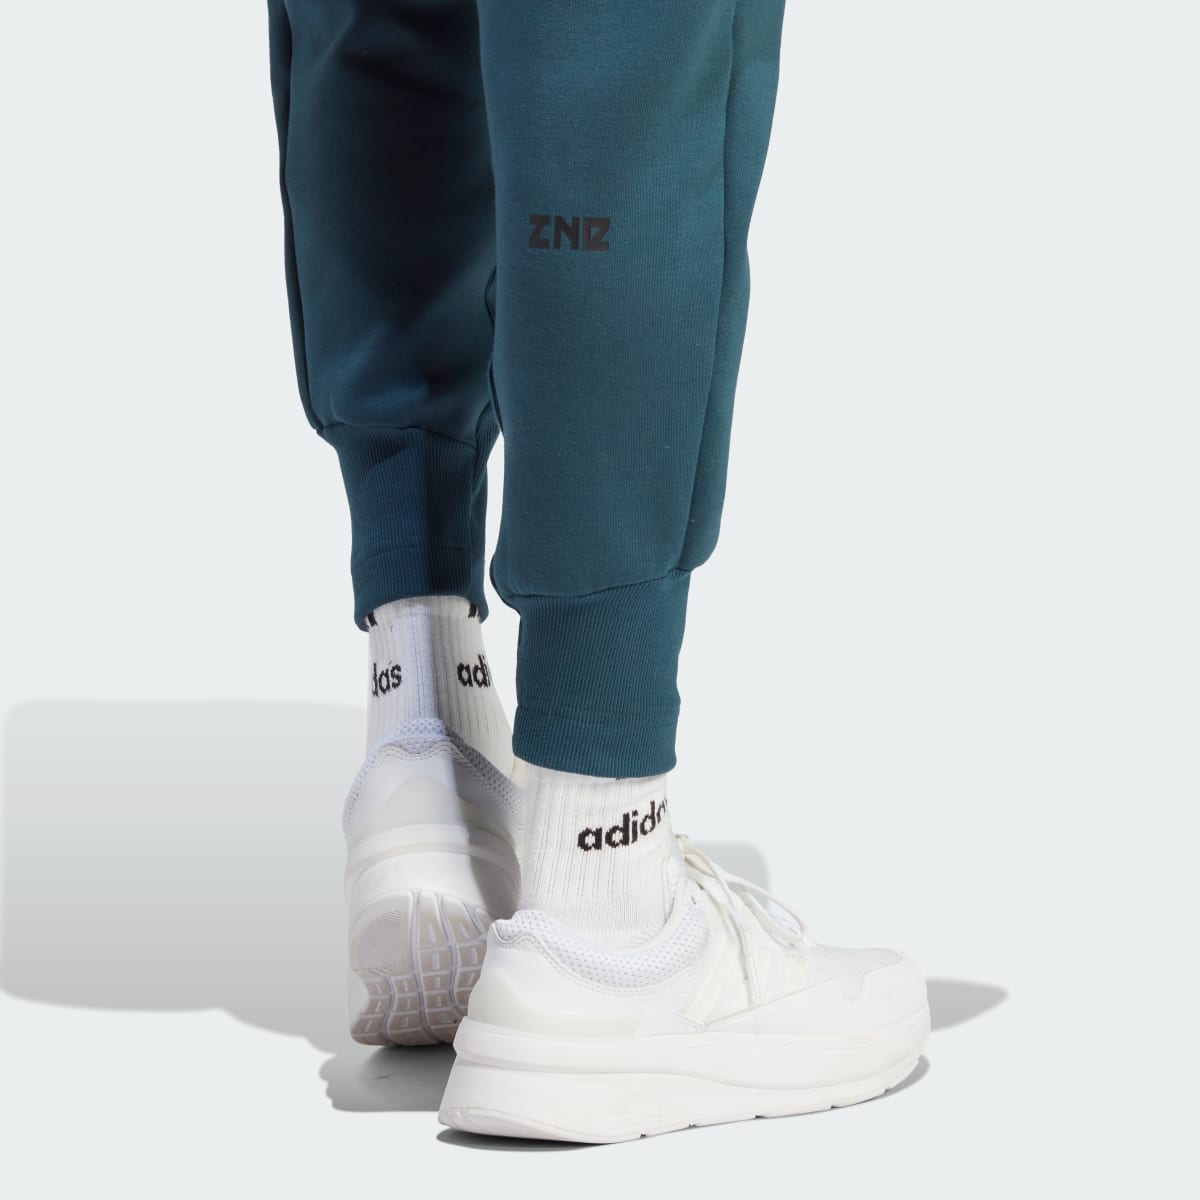 Adidas Z.N.E. Tracksuit Bottoms. 7